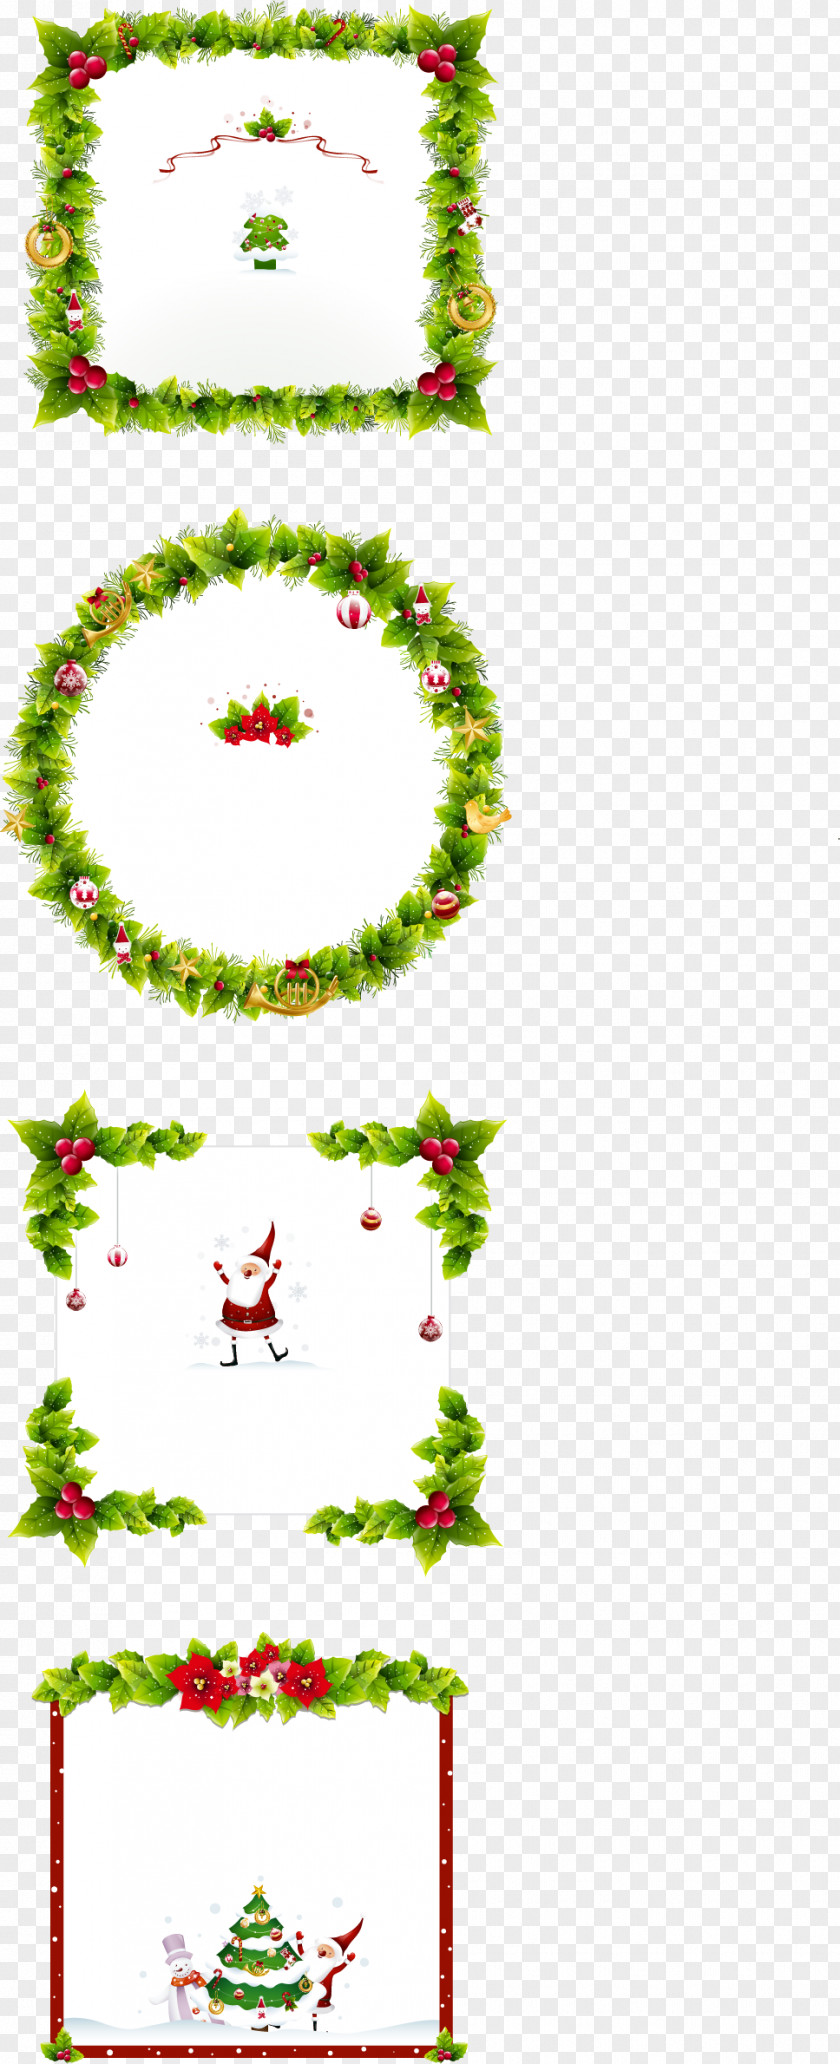 Christmas Borders Free Download Ornament Picture Frame Clip Art PNG